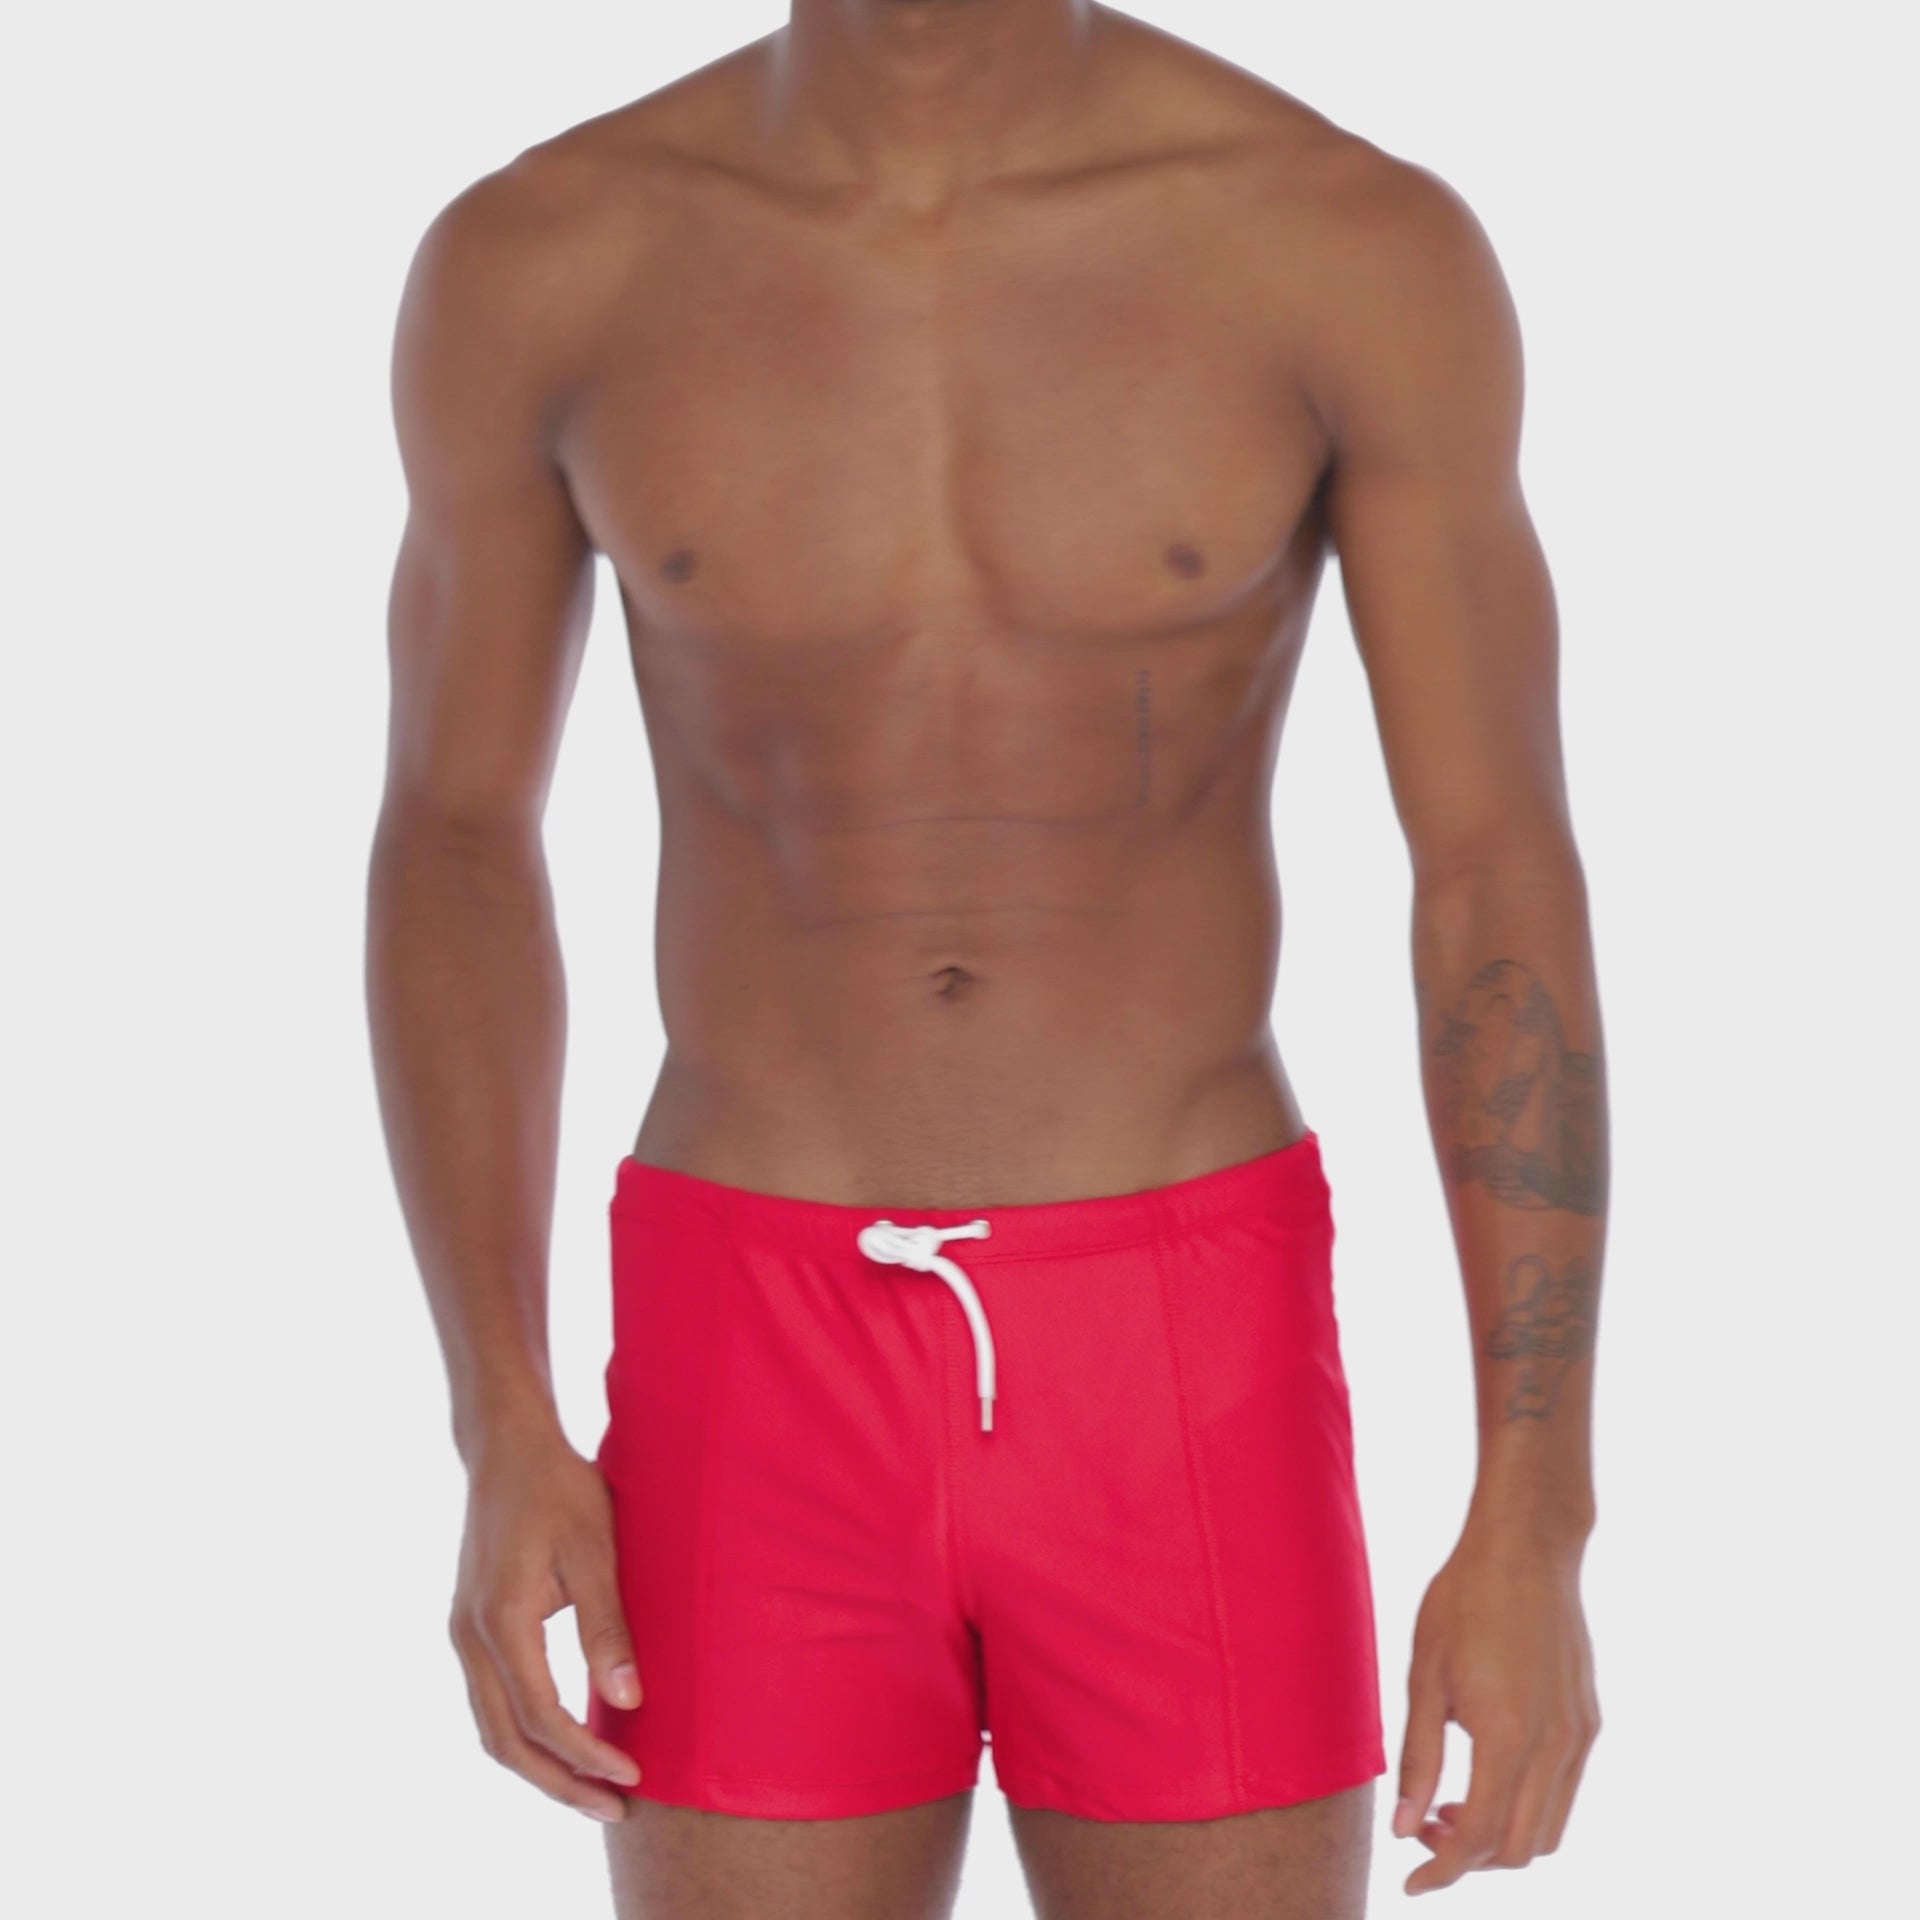 A WHITE WALL VIDEO OF A MALE MODEL WEARING A SAMMY SHOP UNISEX CHERRY ECO SWIM TRUNK